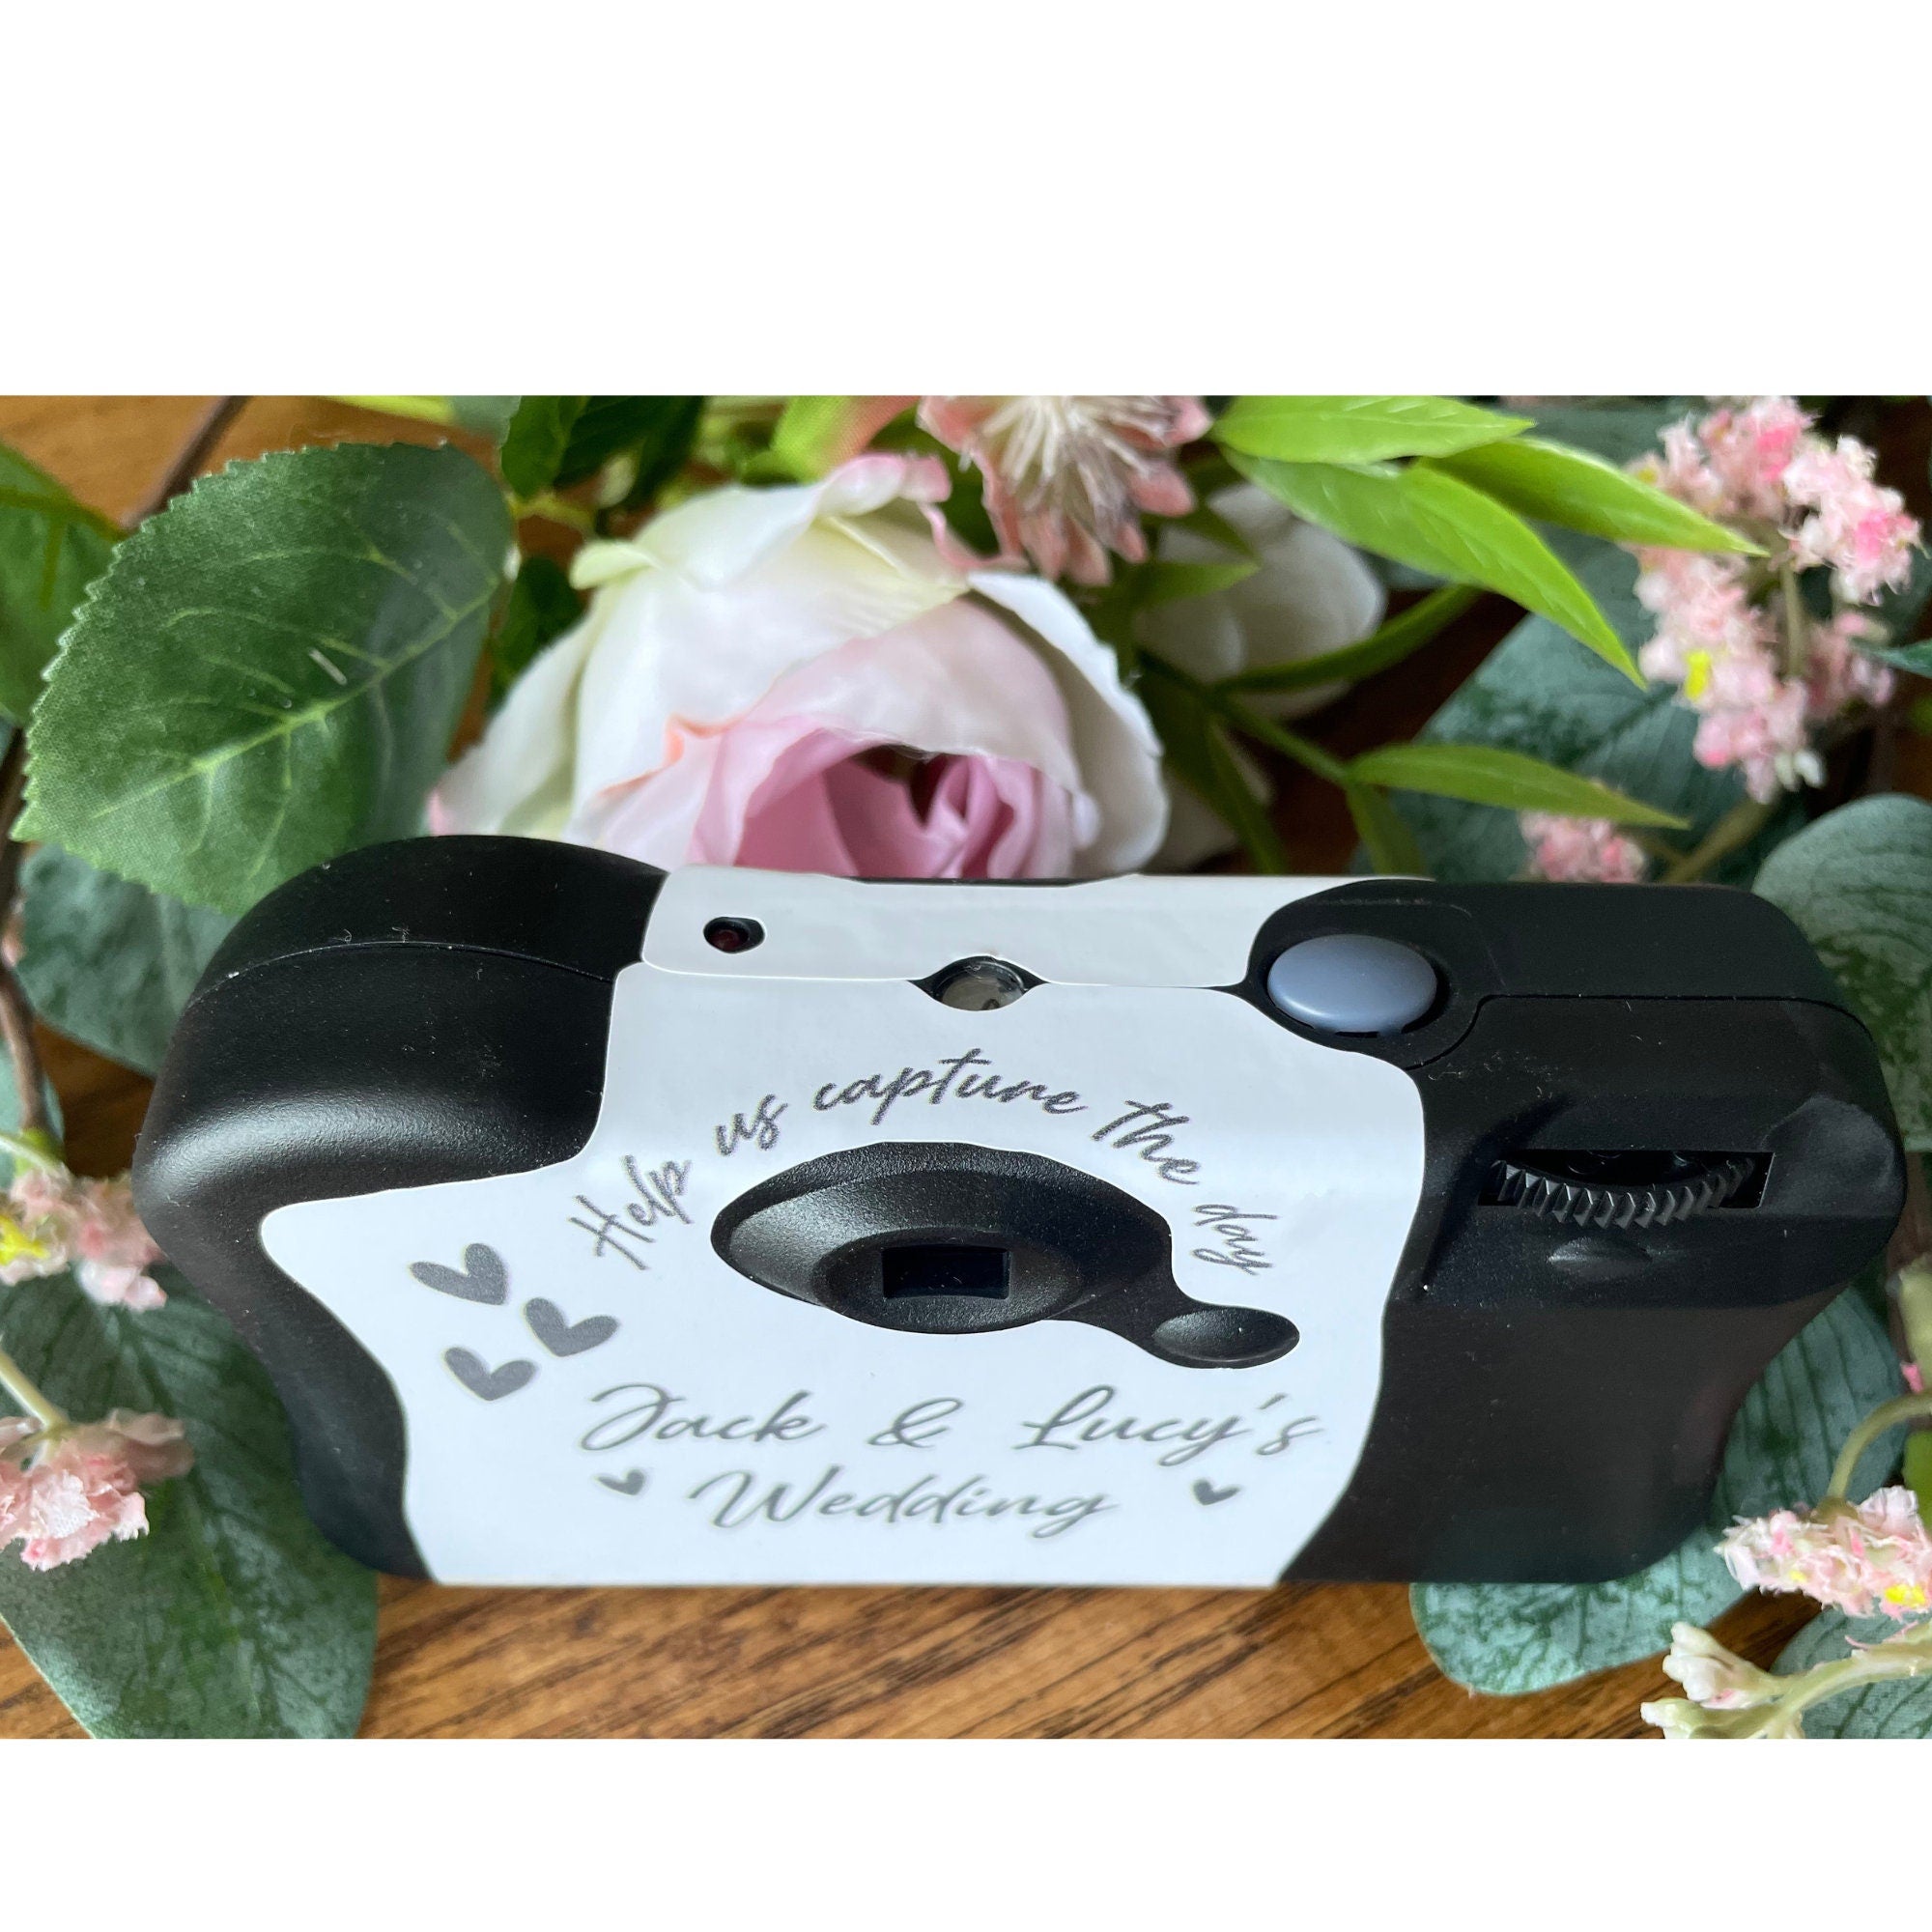 Disposable Camera 24 Exposure Film, Bachelorette Party Favor, Bridesmaid  Gift, Wedding Favor, Photo Booth Prop, Instant Camera 